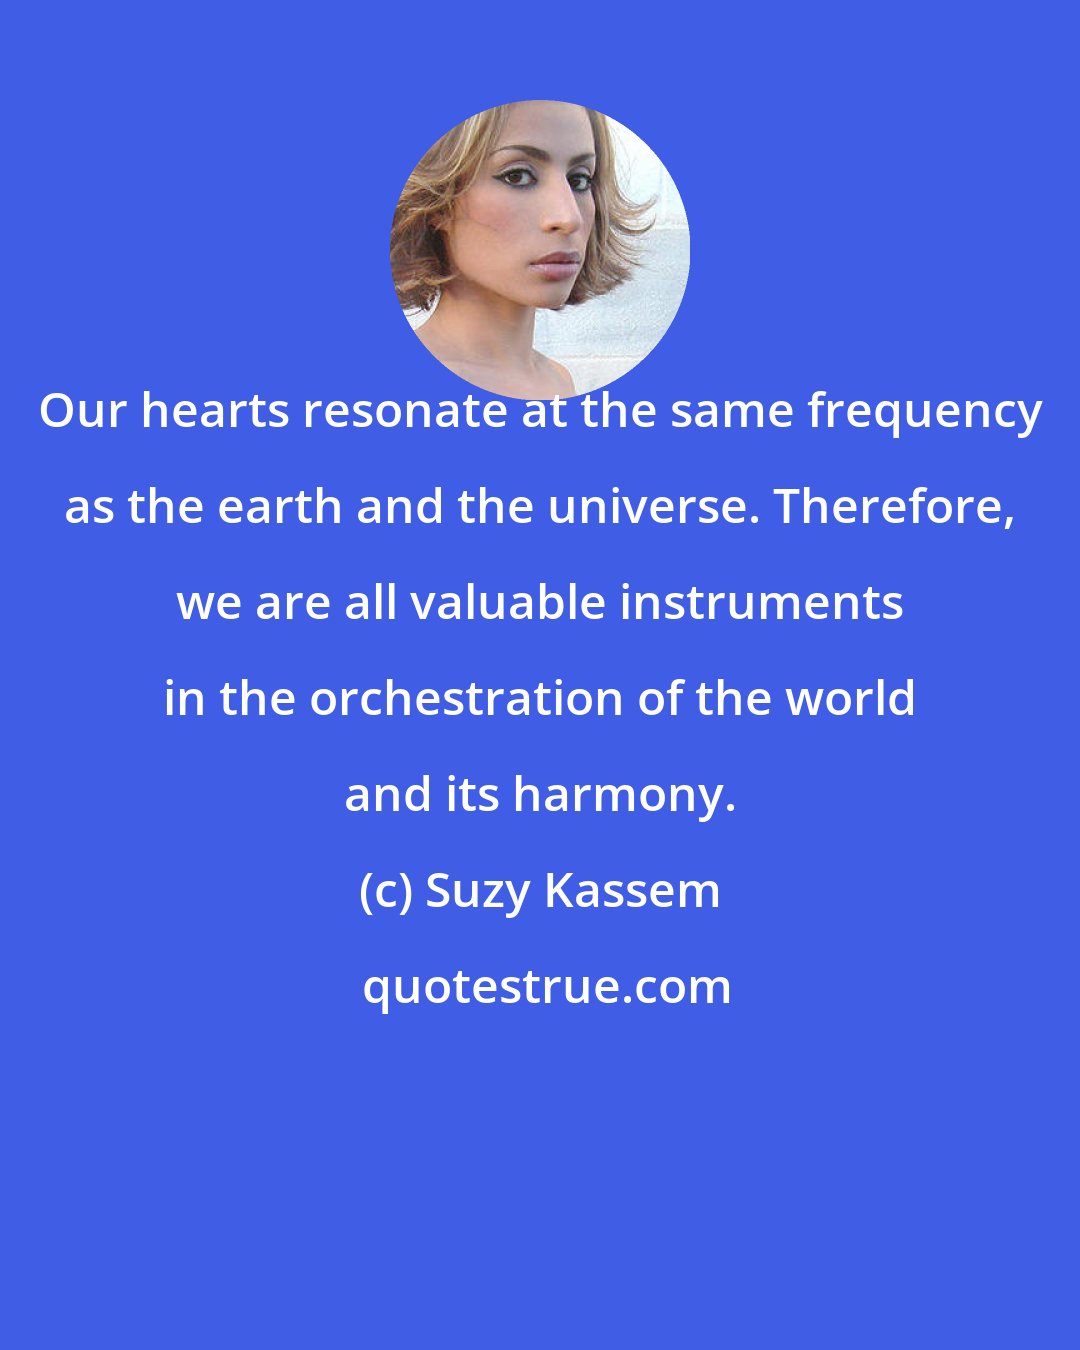 Suzy Kassem: Our hearts resonate at the same frequency as the earth and the universe. Therefore, we are all valuable instruments in the orchestration of the world and its harmony.